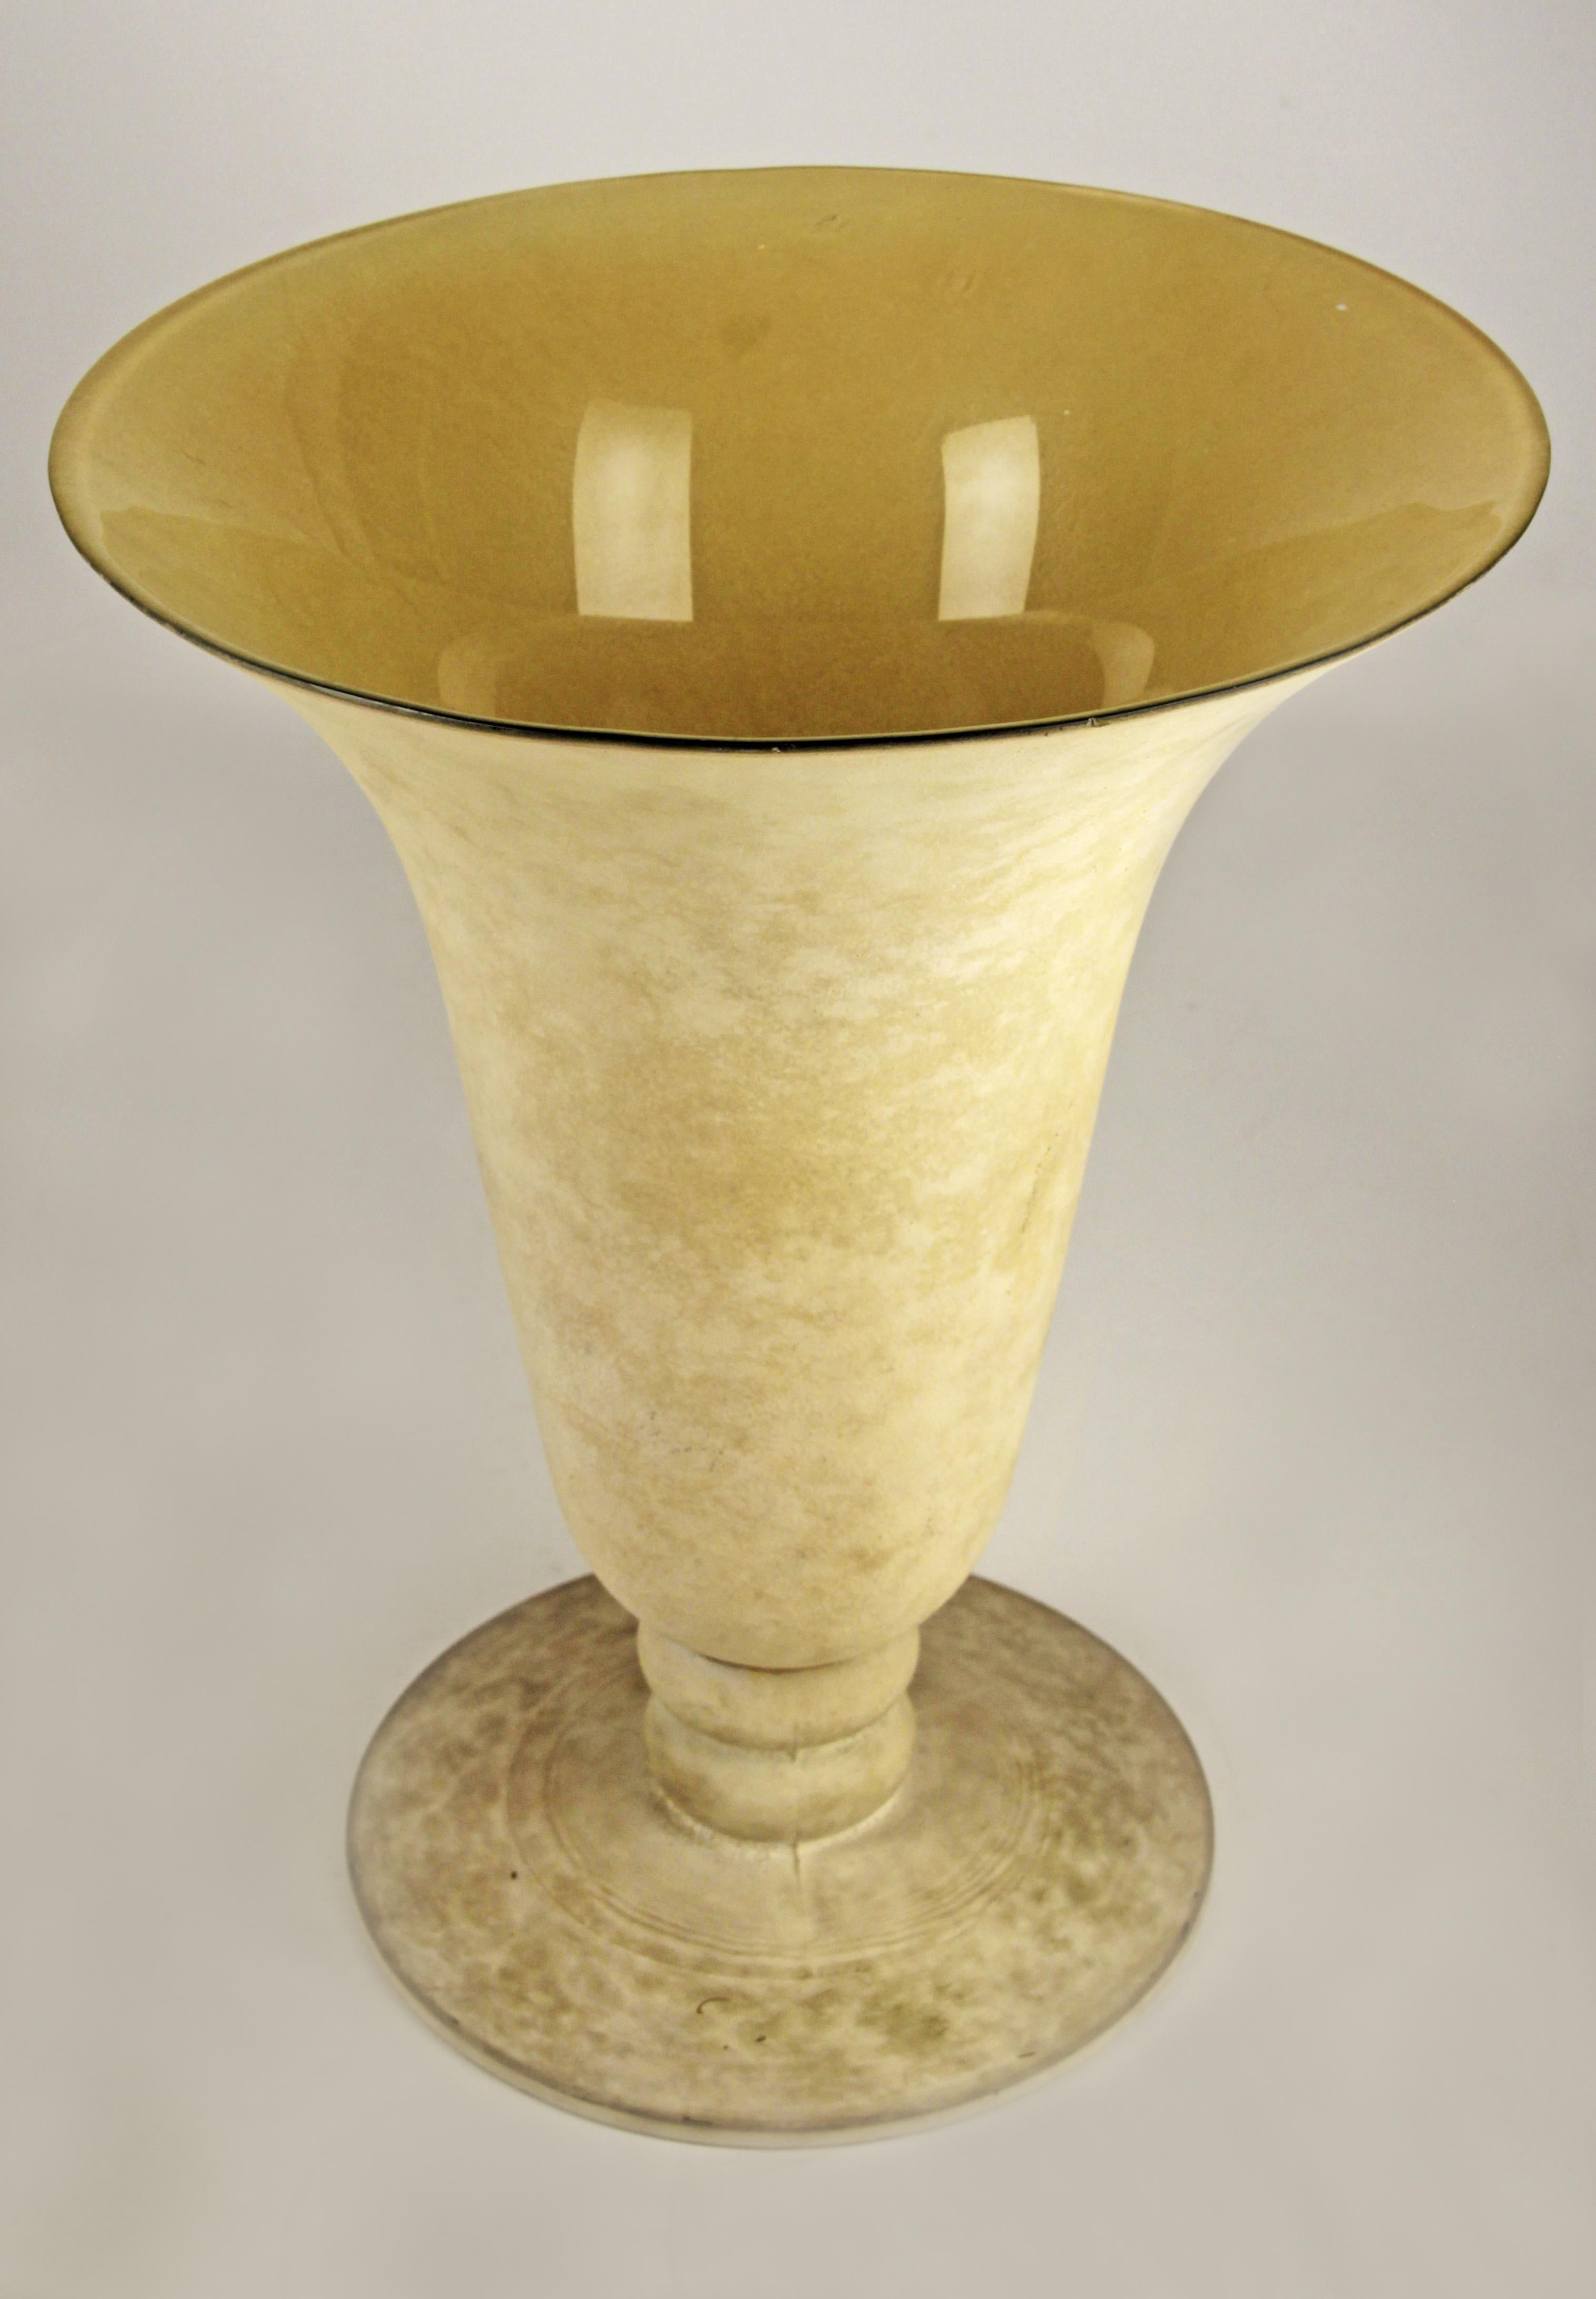 Art Nouveau Modernist French Desing Footed Trumpet Frosted Glass Broad Vase by André Groult For Sale